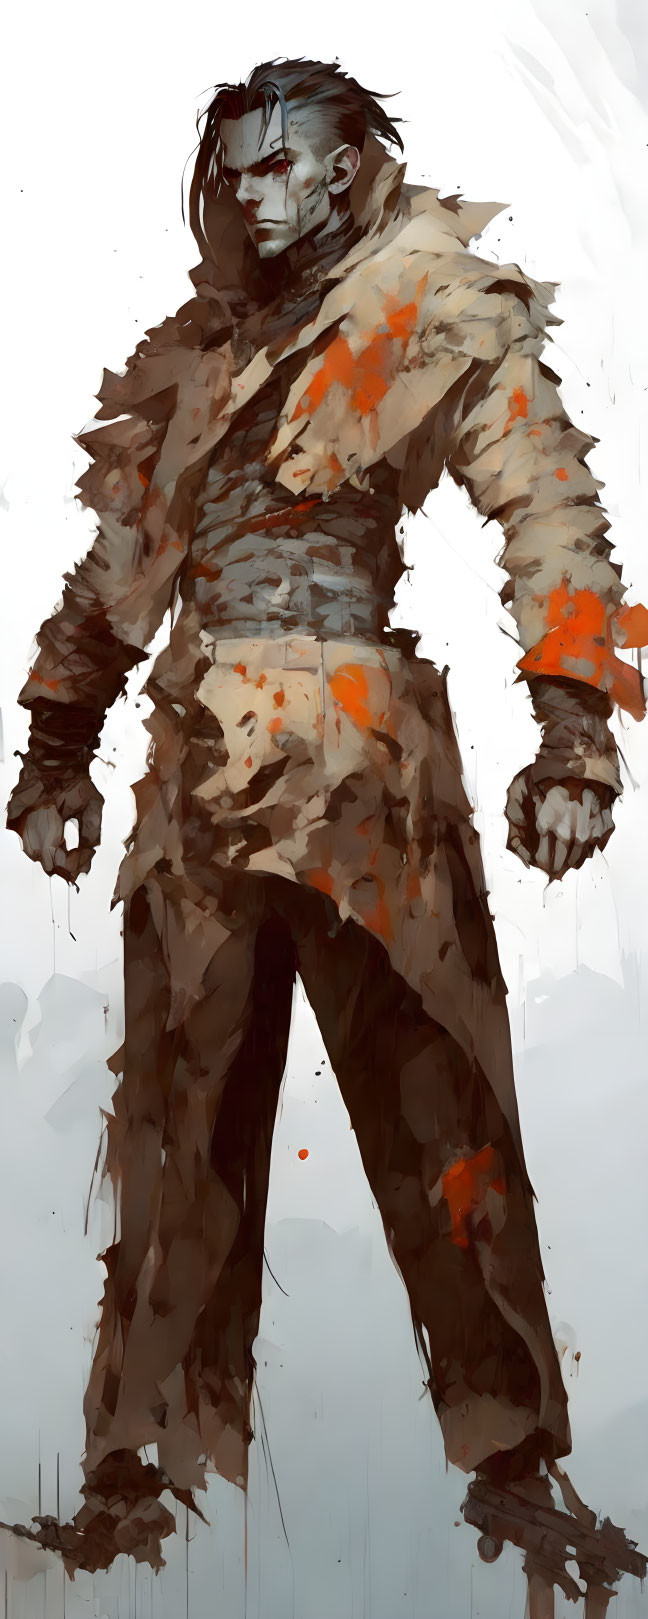 Illustration of determined man in tattered outfit with orange accents.